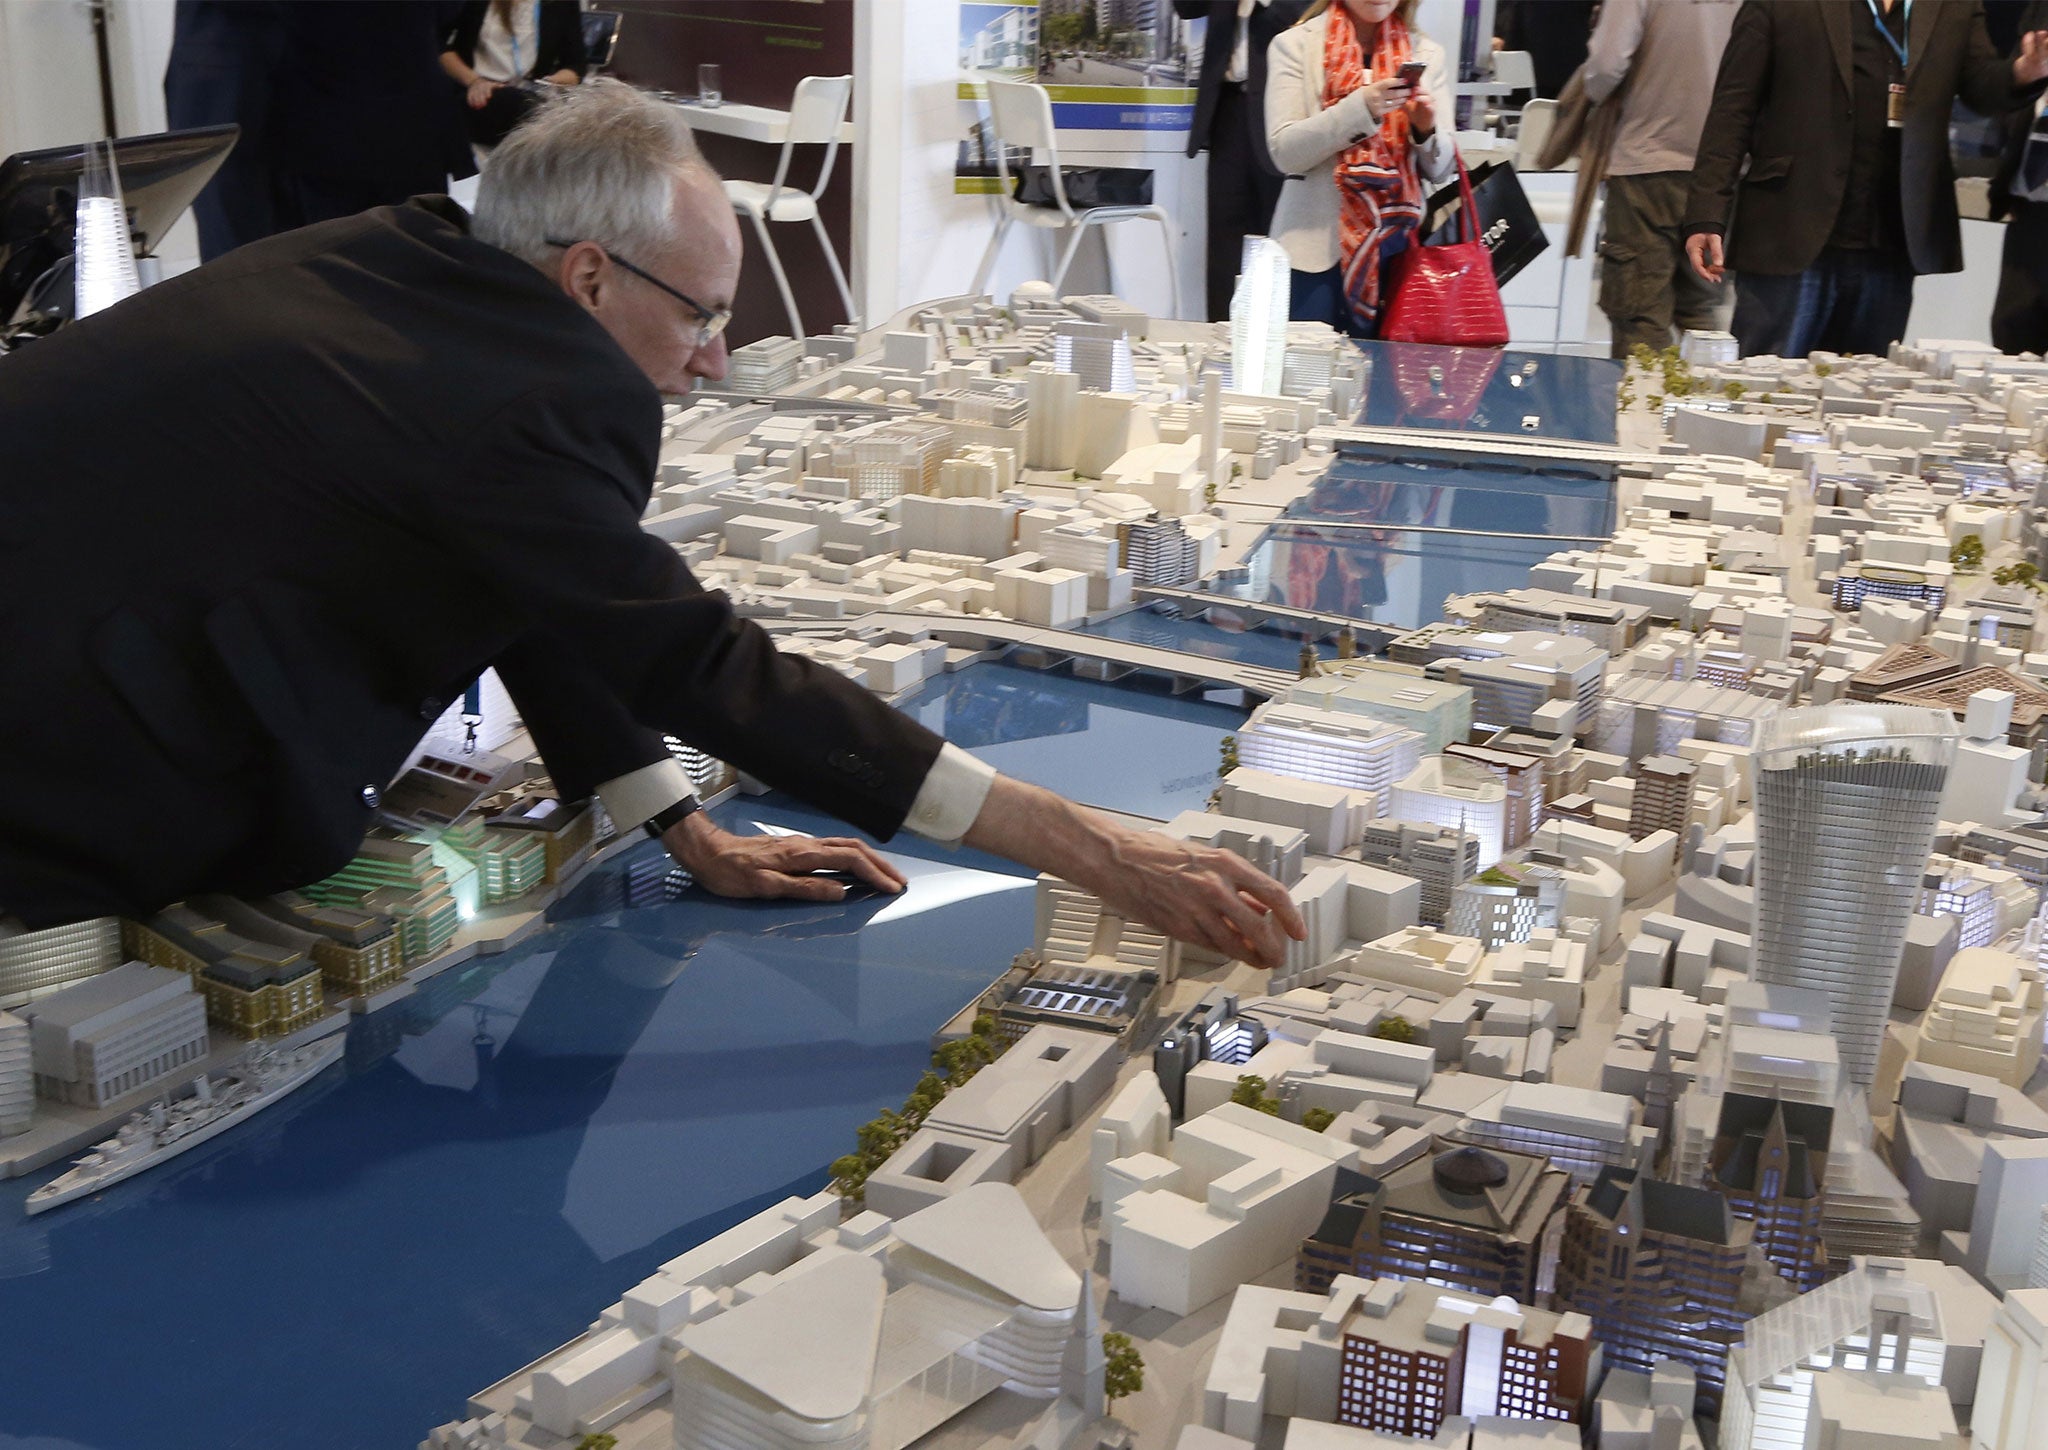 People look at a scale model of the city of London on March 11, 2014 in Cannes, southeastern France, during the MIPIM, an international real estate show for professionals